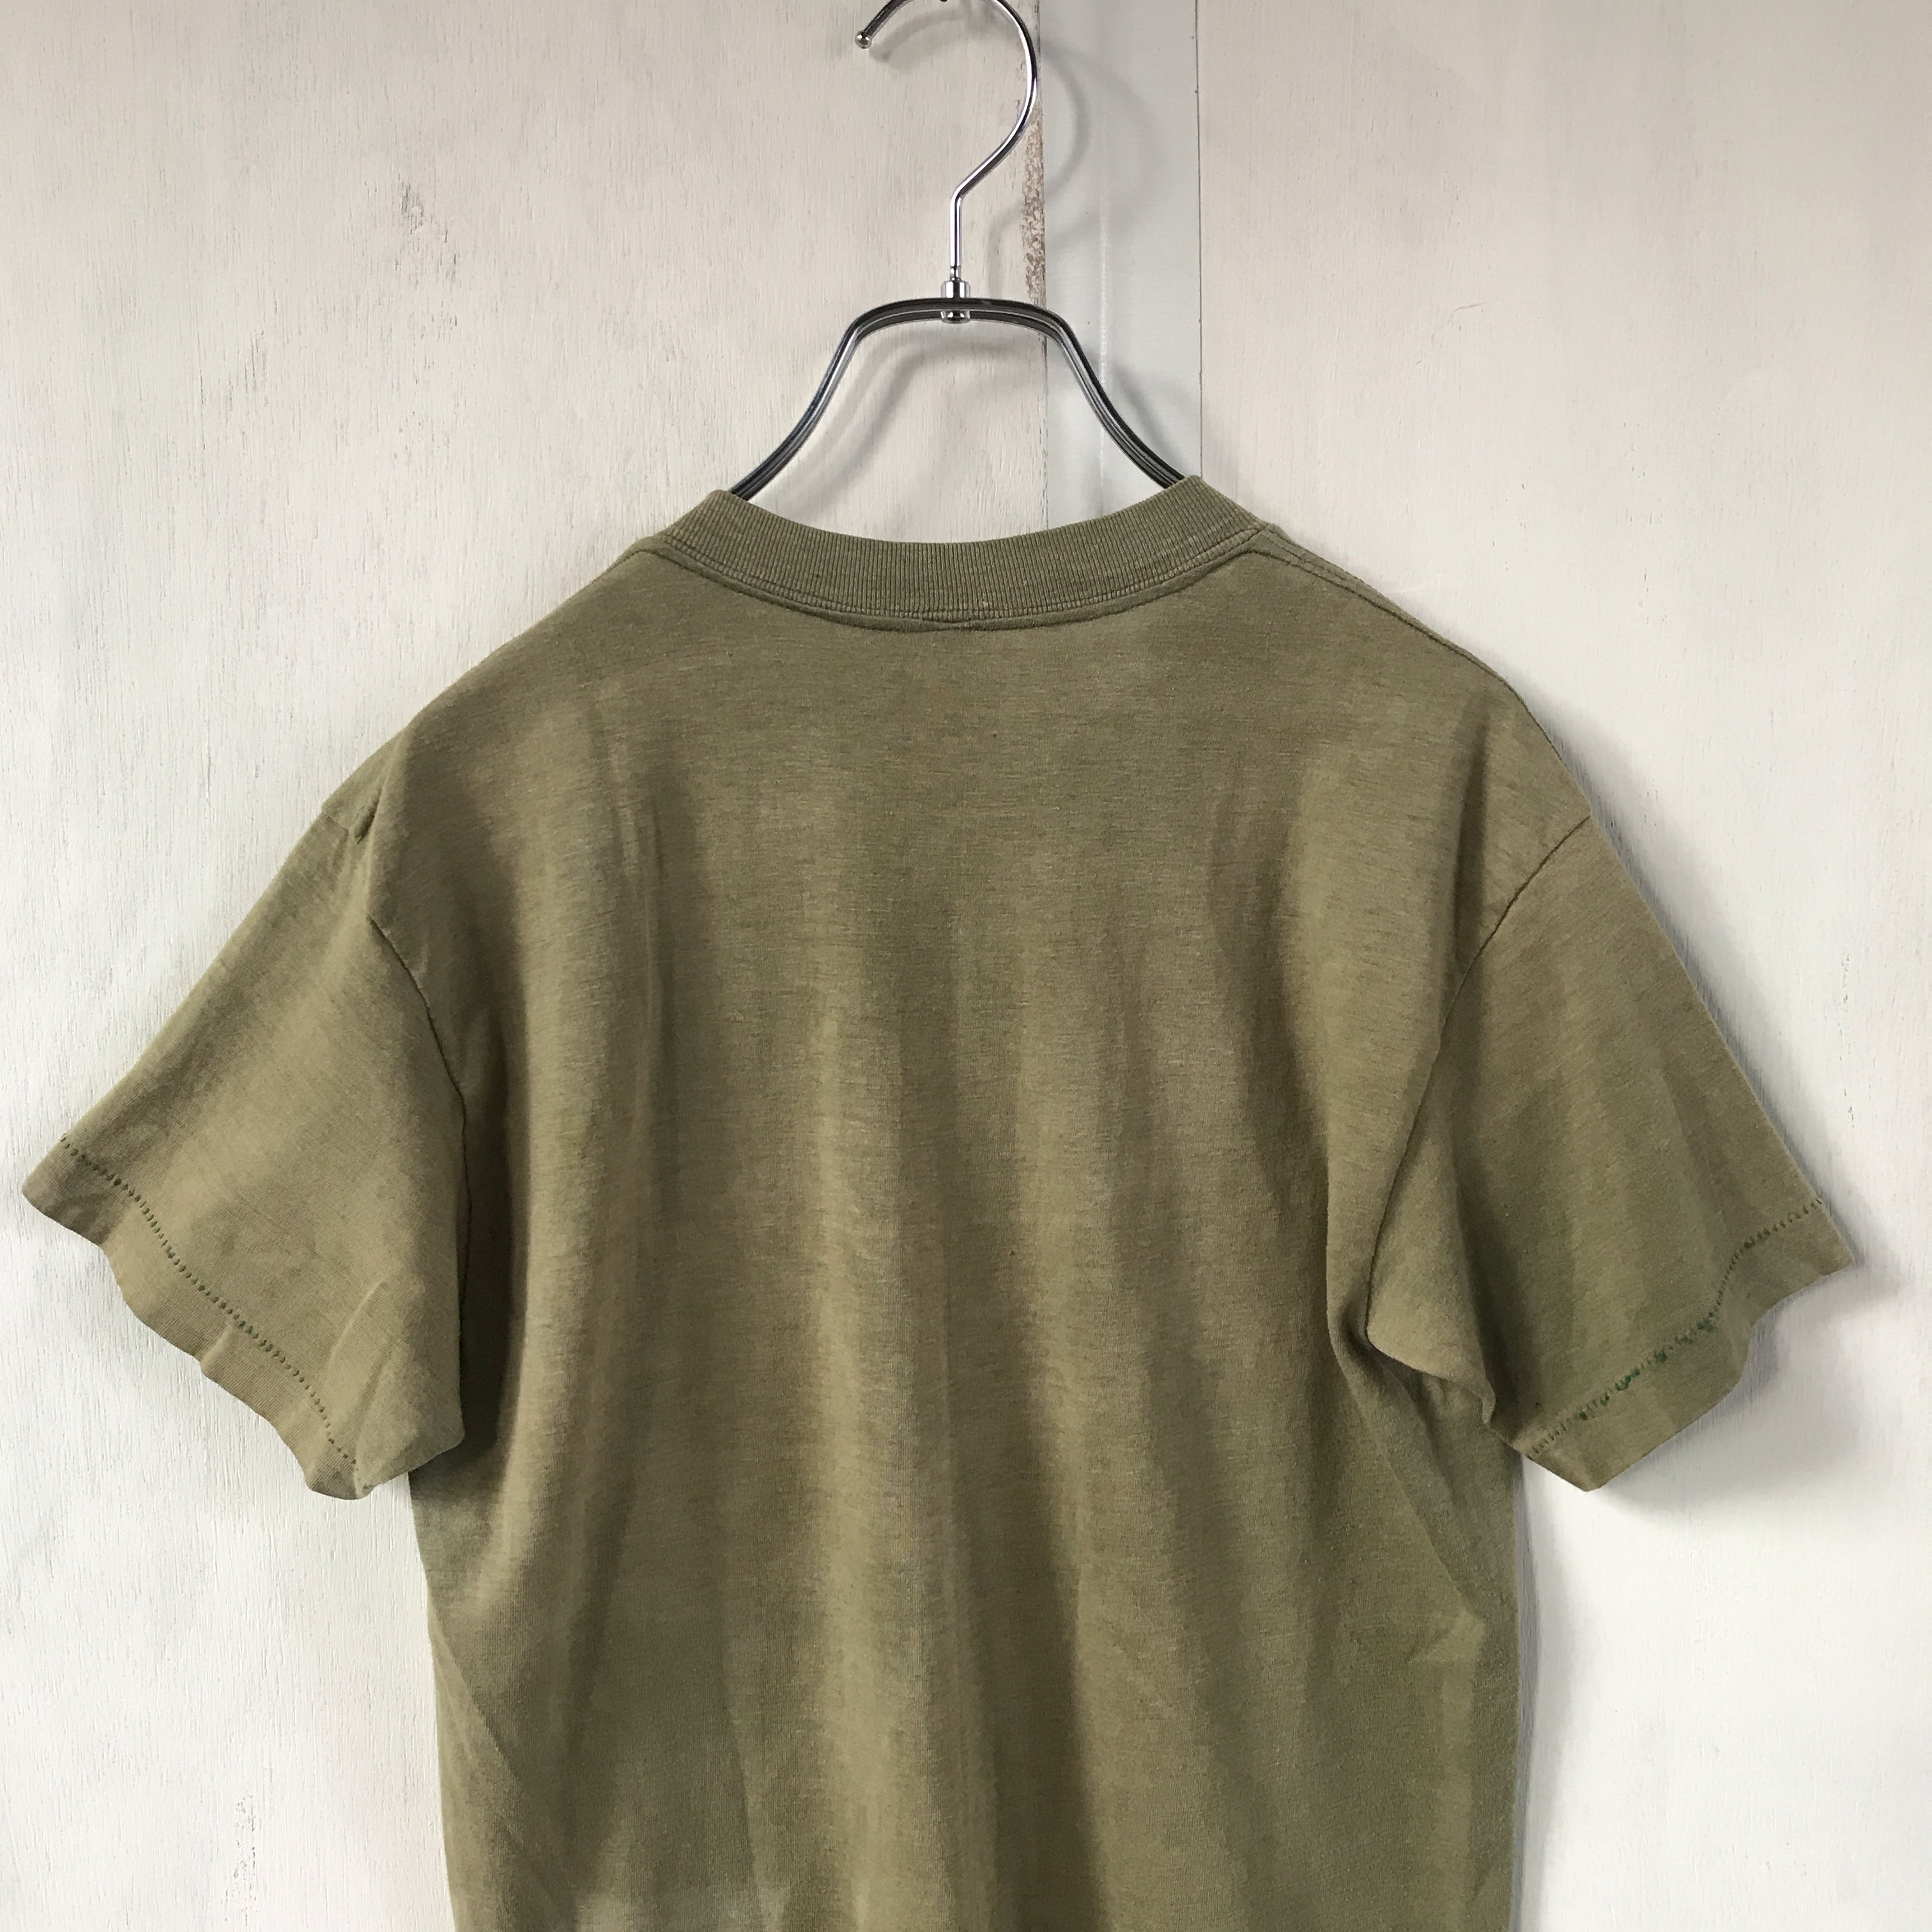 [ ONLY ONE !! ] MASH SHORT SLEEVE  T-SHIRT / Mr.Clean Select